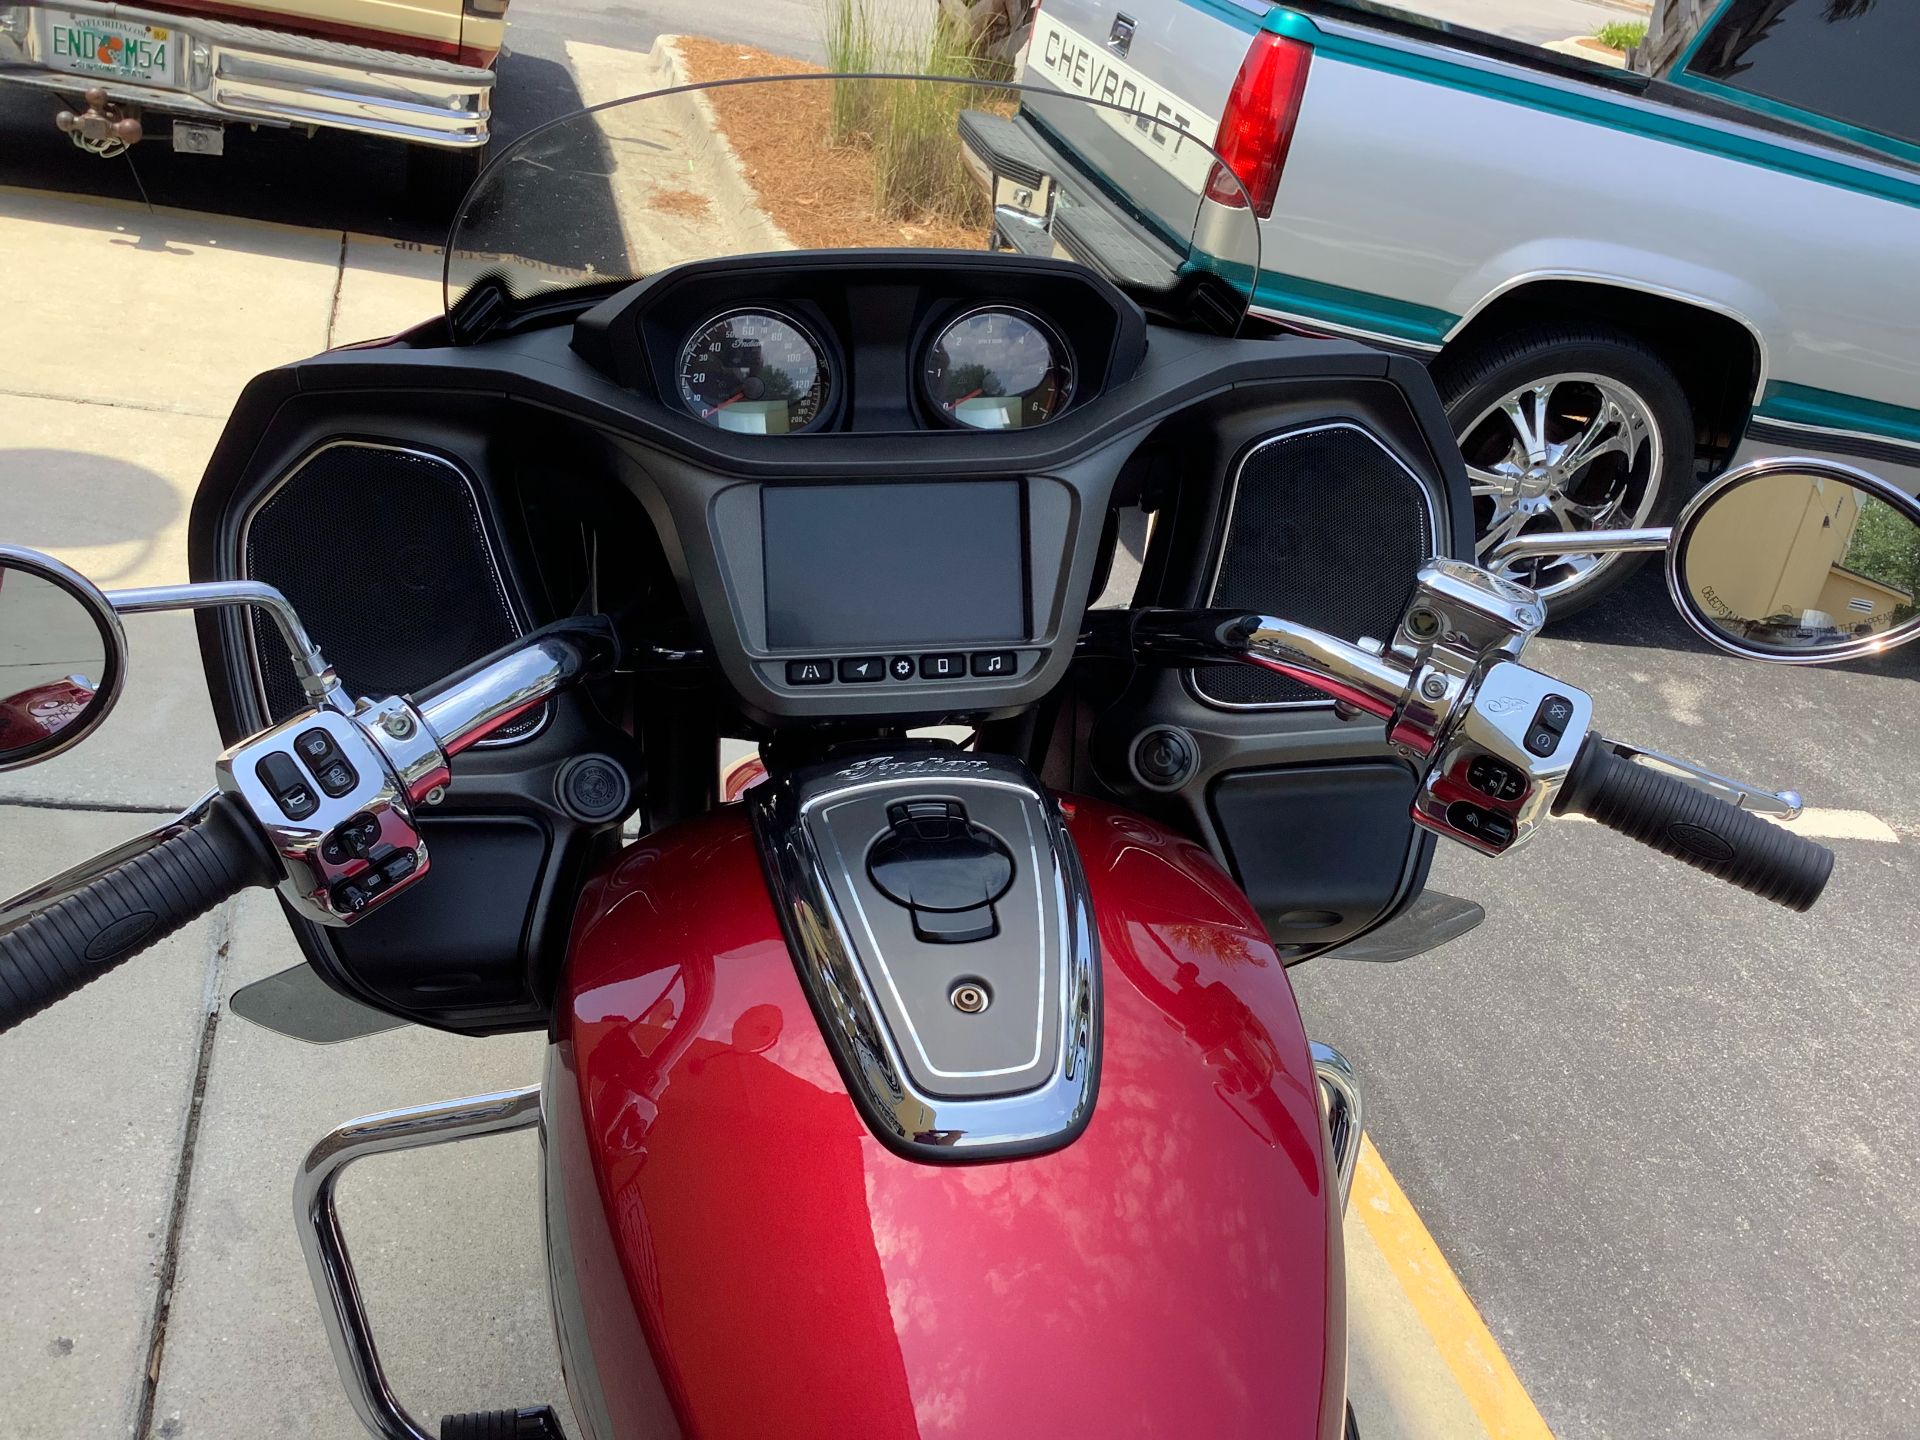 2020 Indian Motorcycle CLALLENGER LIMITED in Panama City Beach, Florida - Photo 13